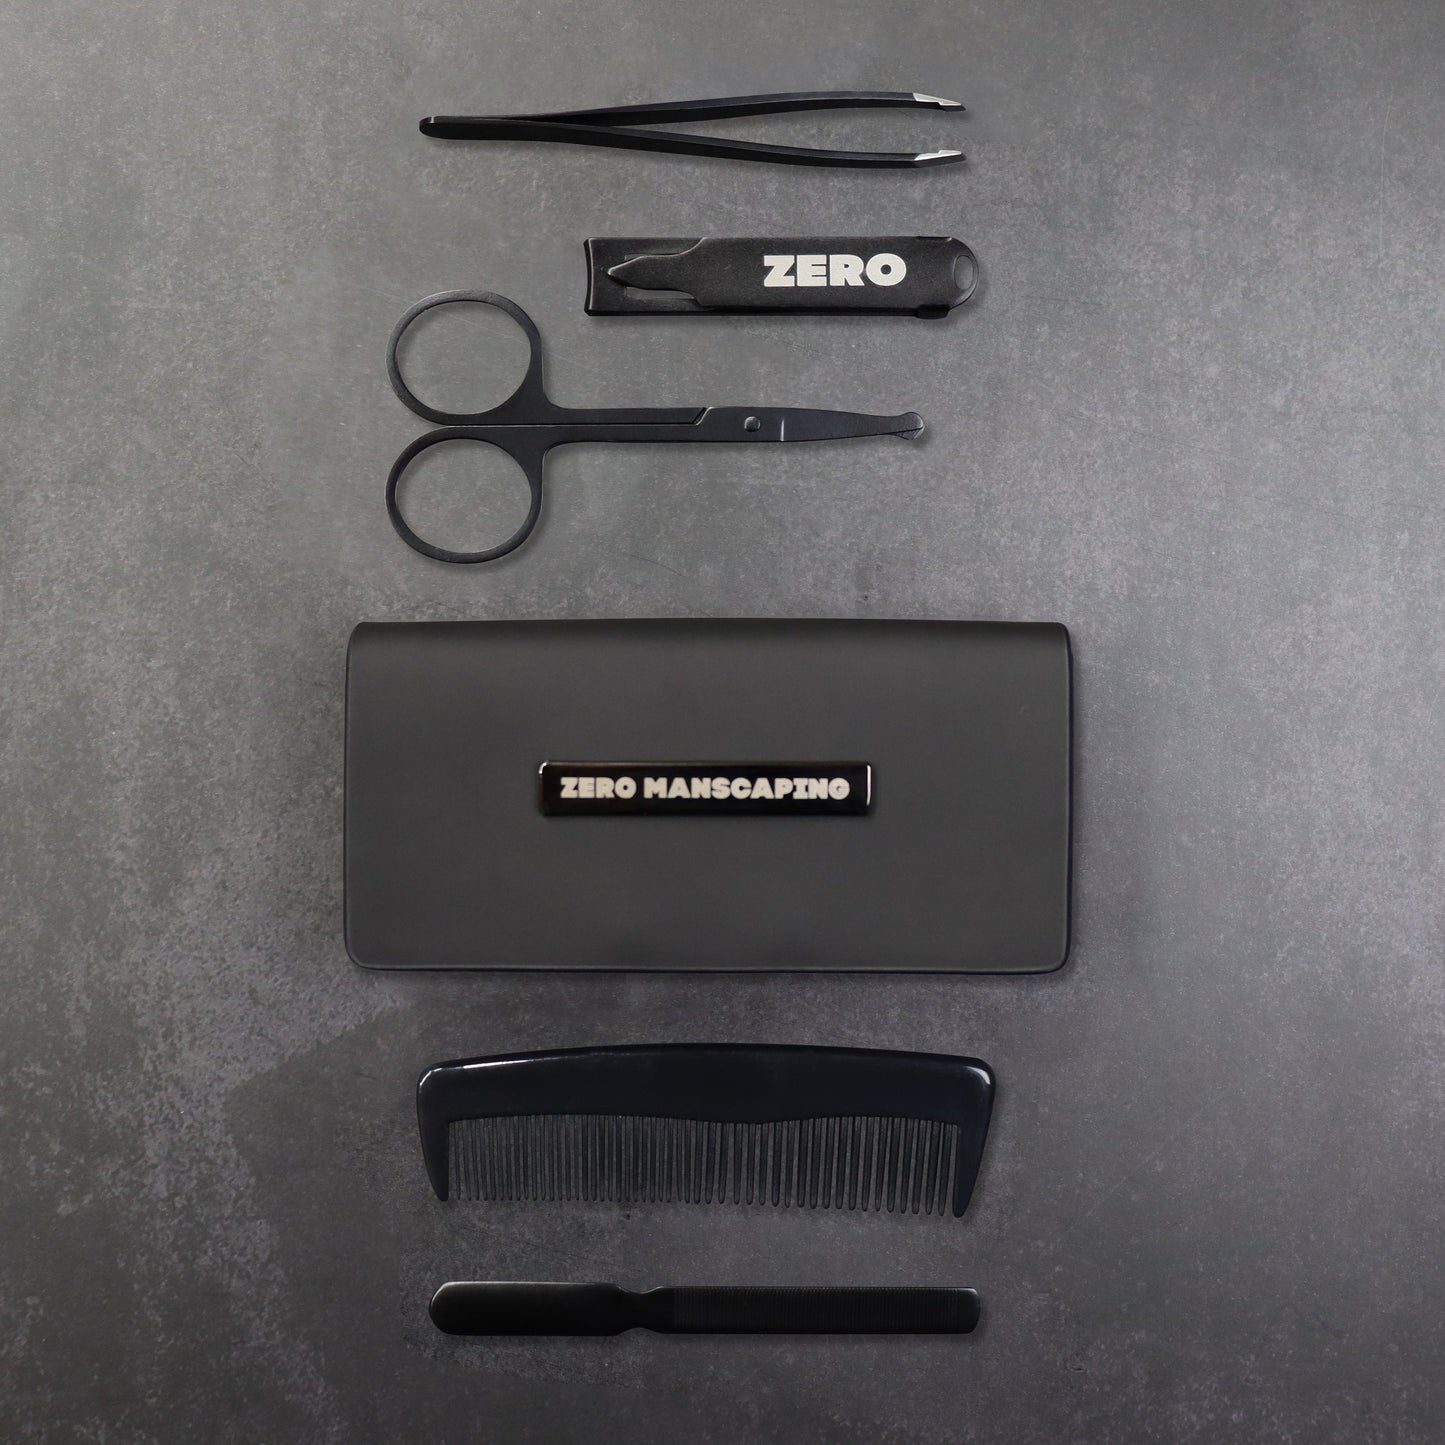 Complete Manicure Set - Zero Nail Kit by Zero Manscaping